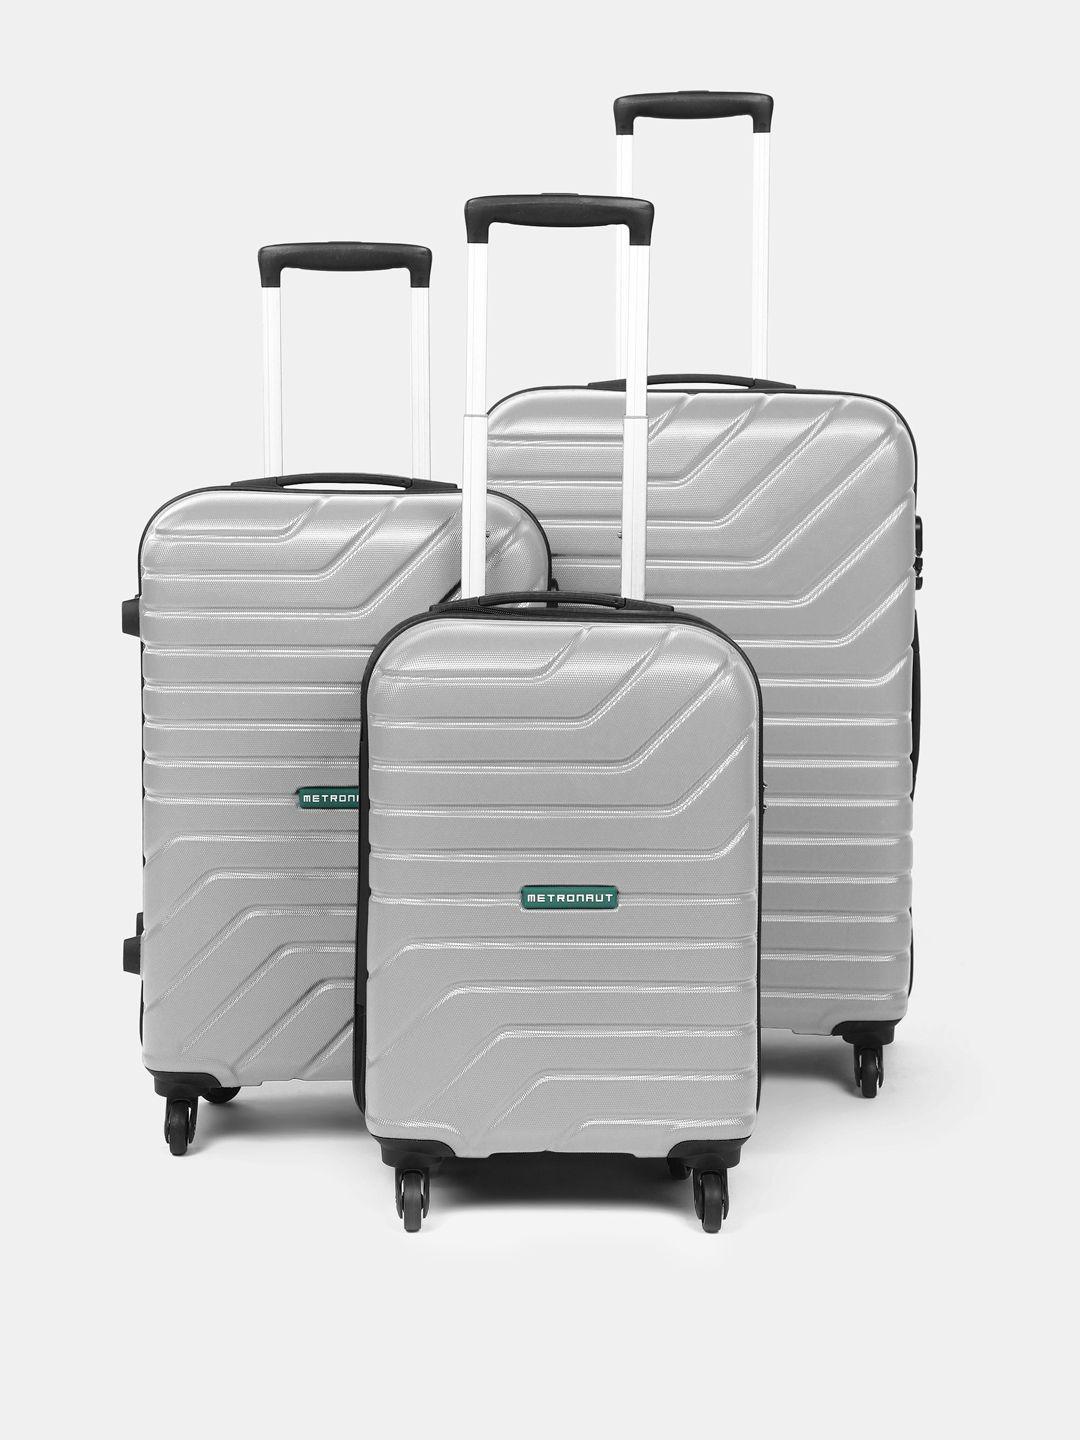 metronaut set of 3 hard shell trolley suitcases